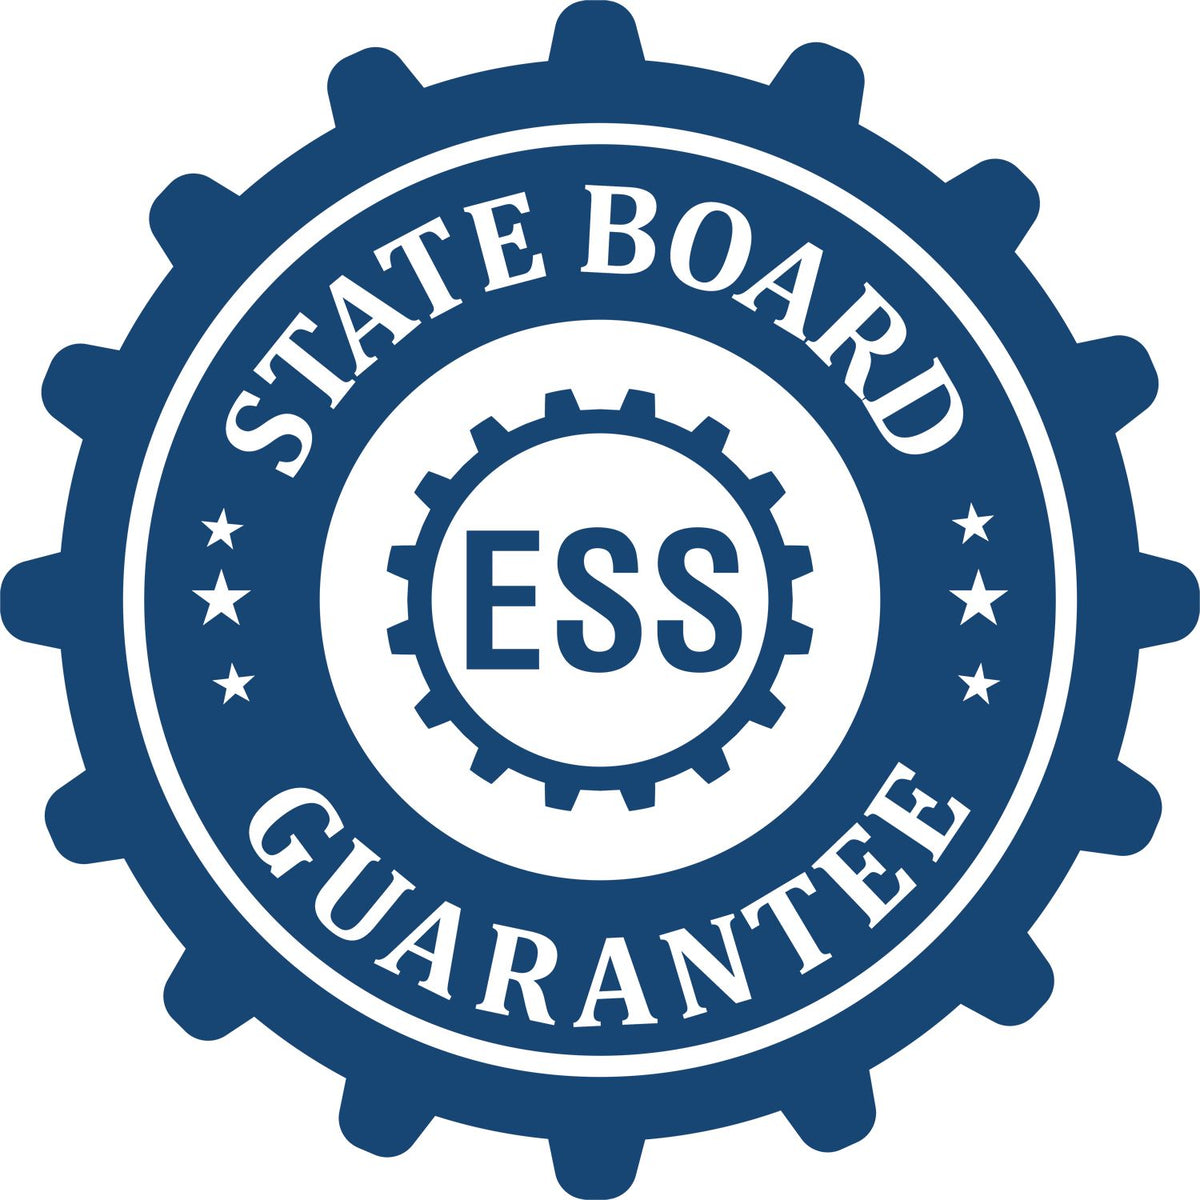 An emblem in a gear shape illustrating a state board guarantee for the Digital Nebraska PE Stamp and Electronic Seal for Nebraska Engineer product.